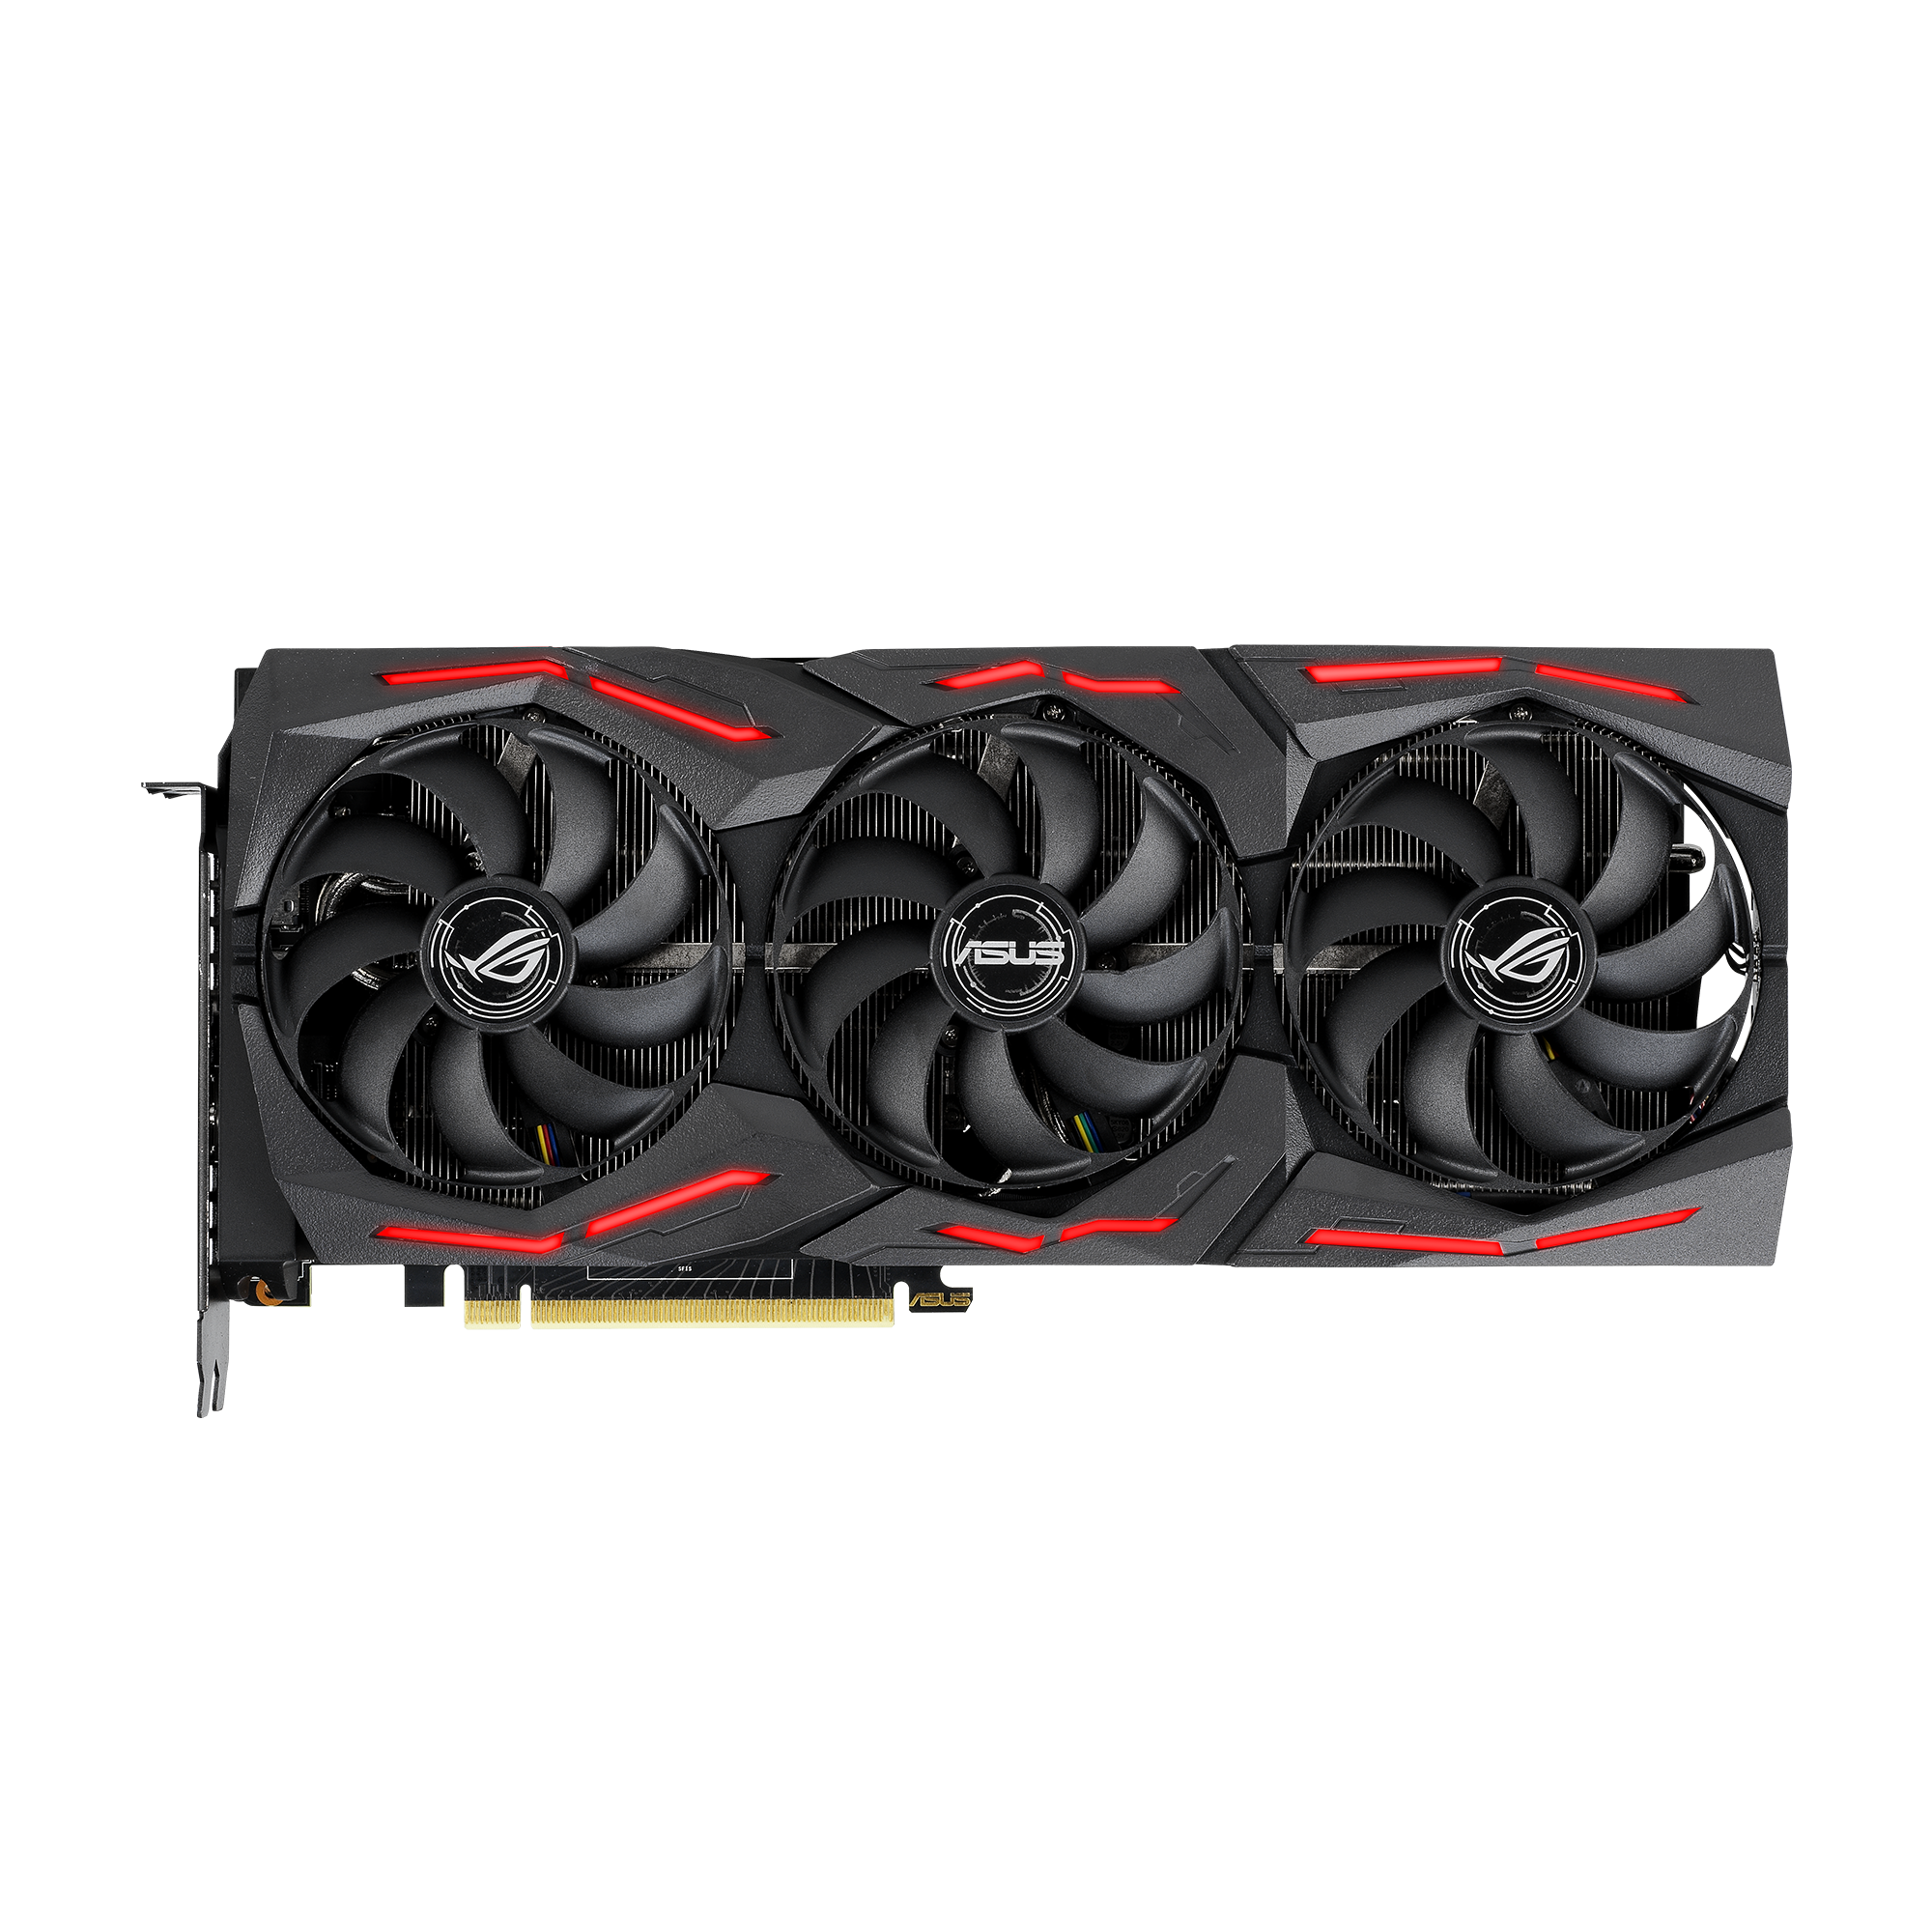 ROG-STRIX-RTX2070S-A8G-GAMING | Graphics Cards | ROG United States